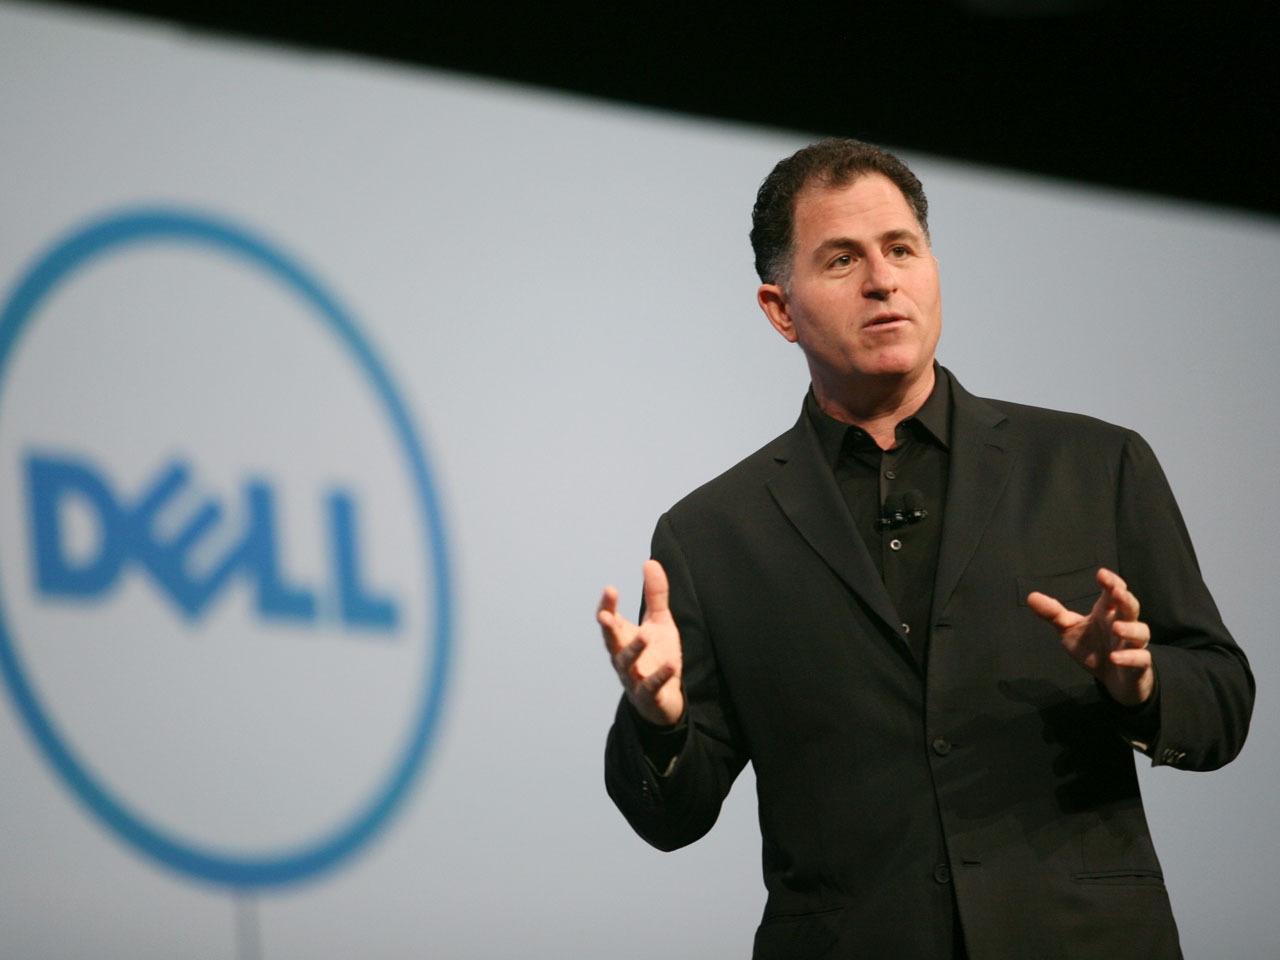 Dell closes on deal to go private - CBS News